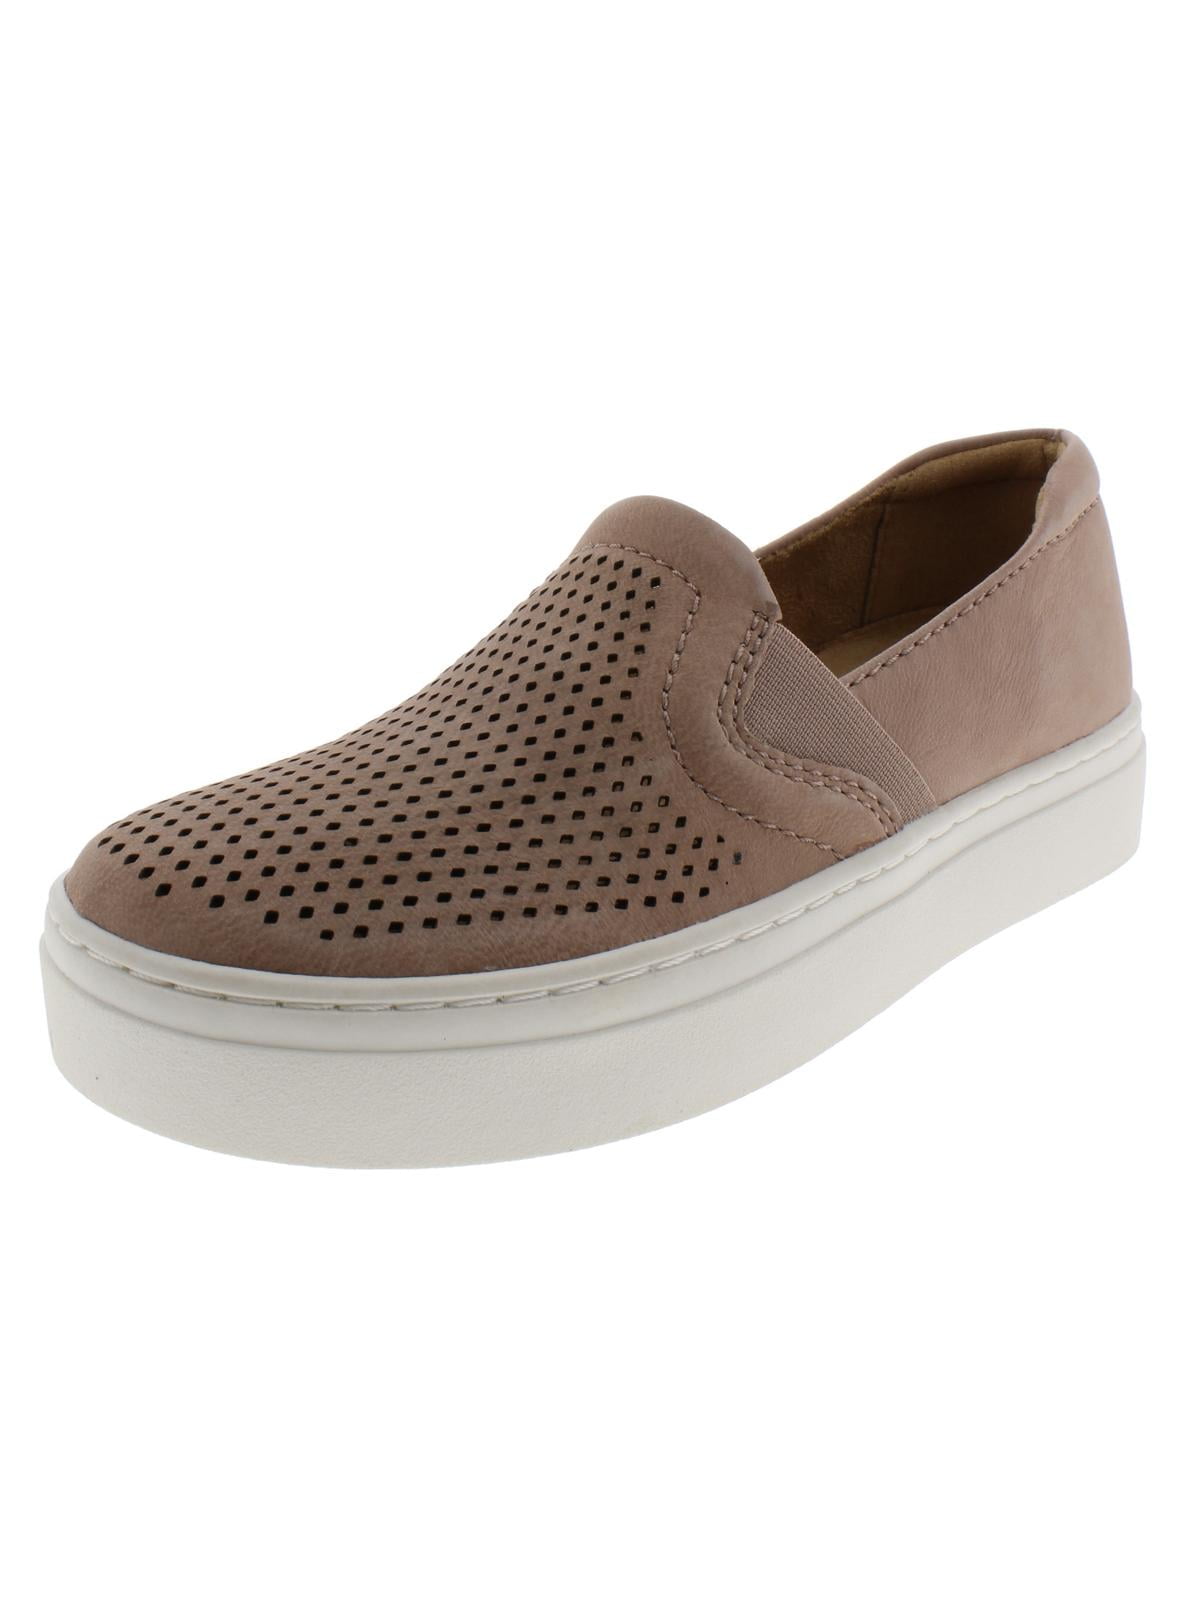 Naturalizer Womens Carly Perforated Slip On Fashion Loafers - Walmart.com